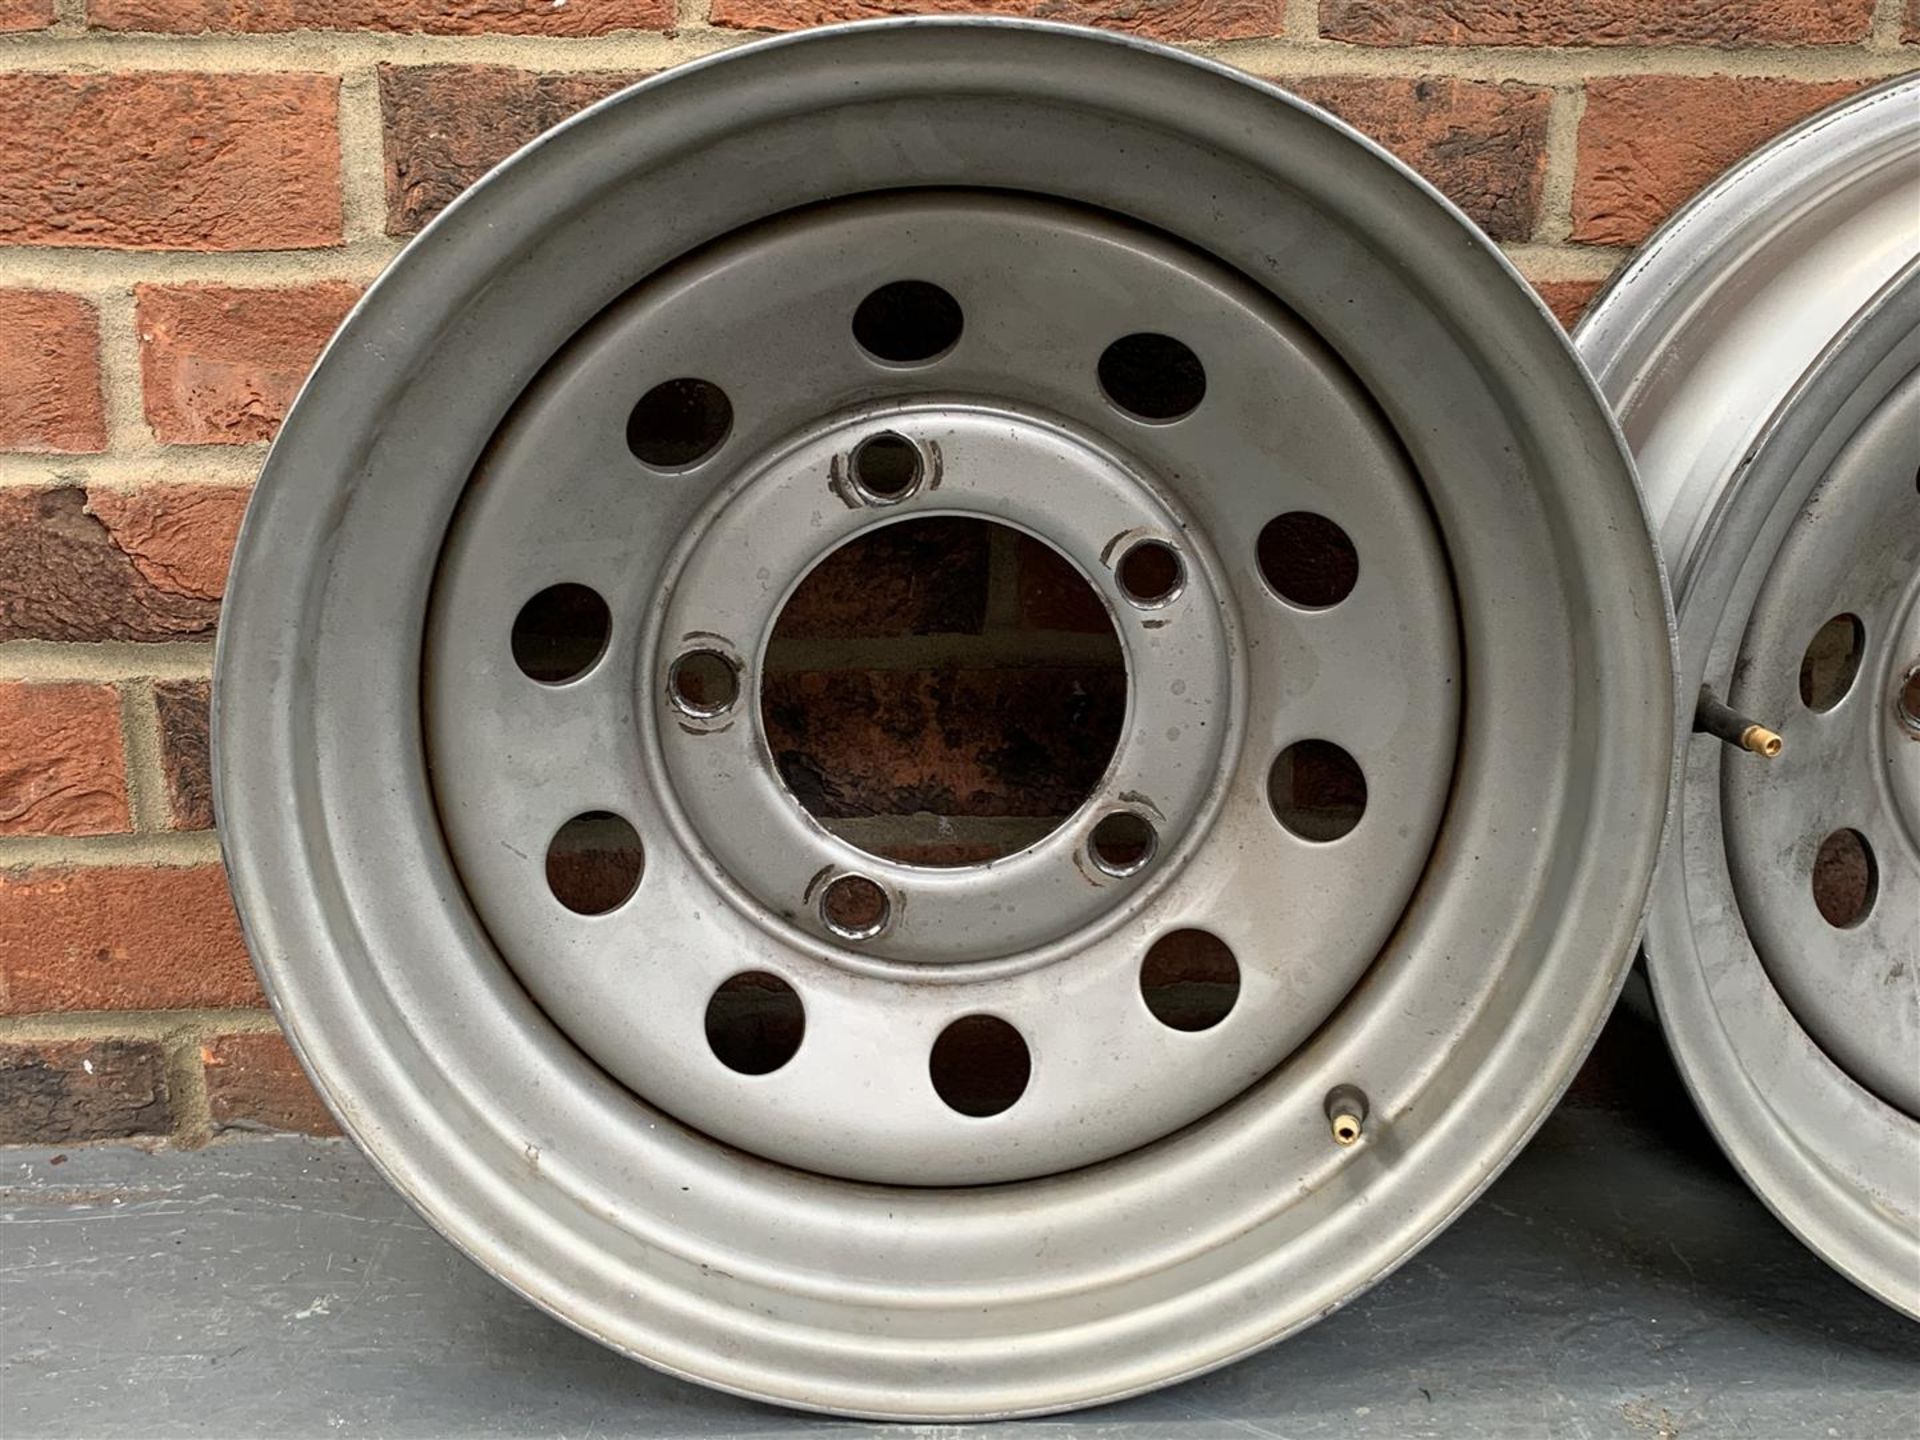 Set Of Four Steel Land Rover Wheels For Series 2/2A/3 - Image 2 of 2